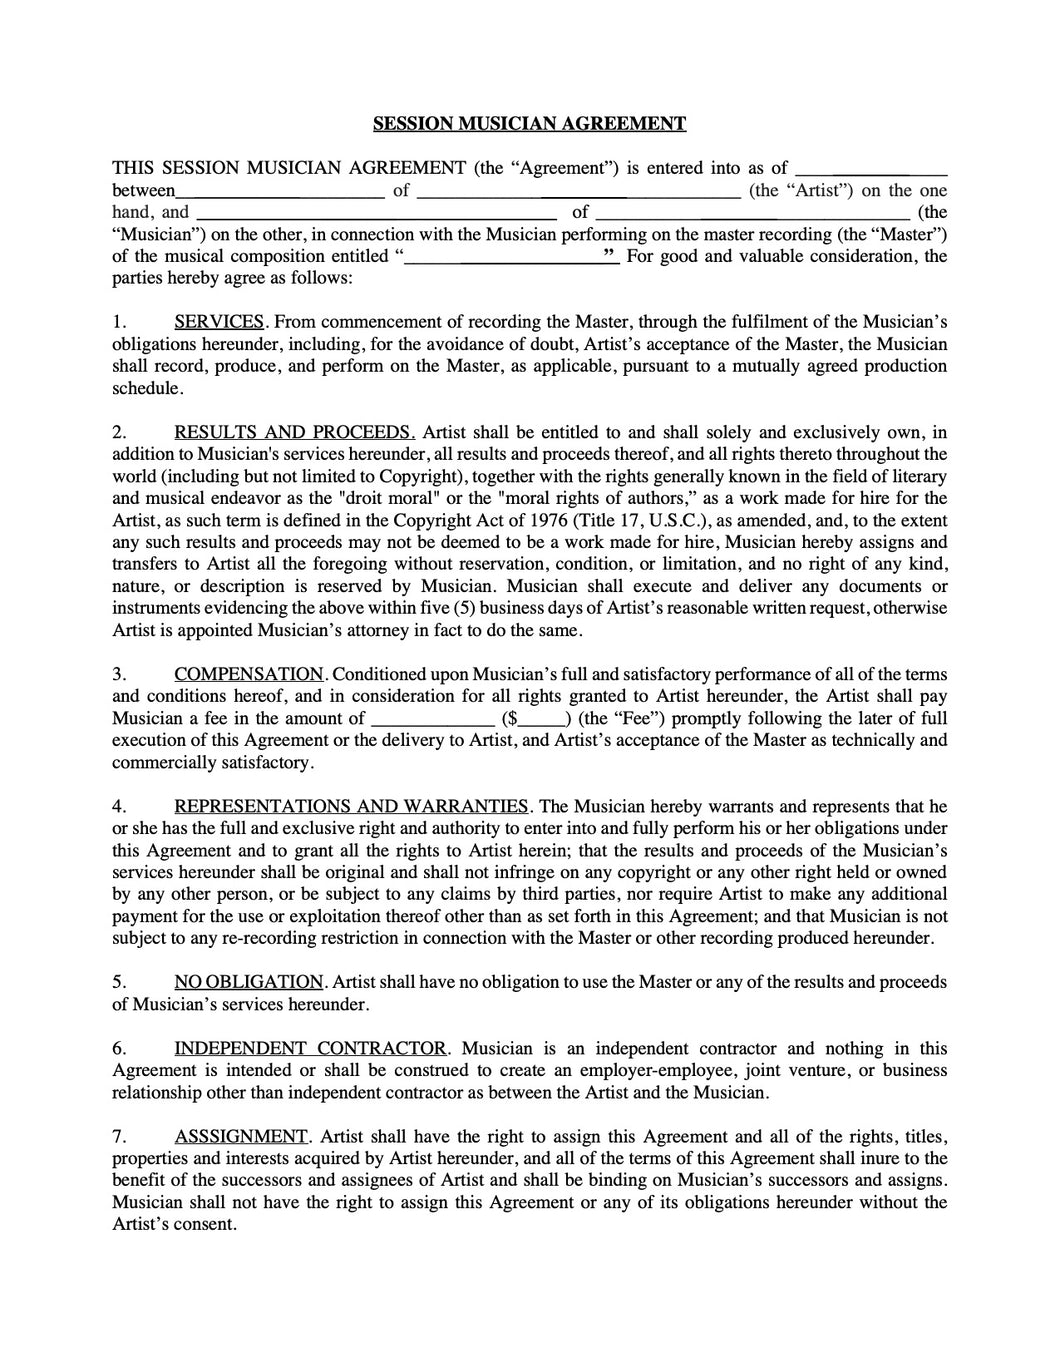 Session Musician Agreement (Flat Fee Buyout)